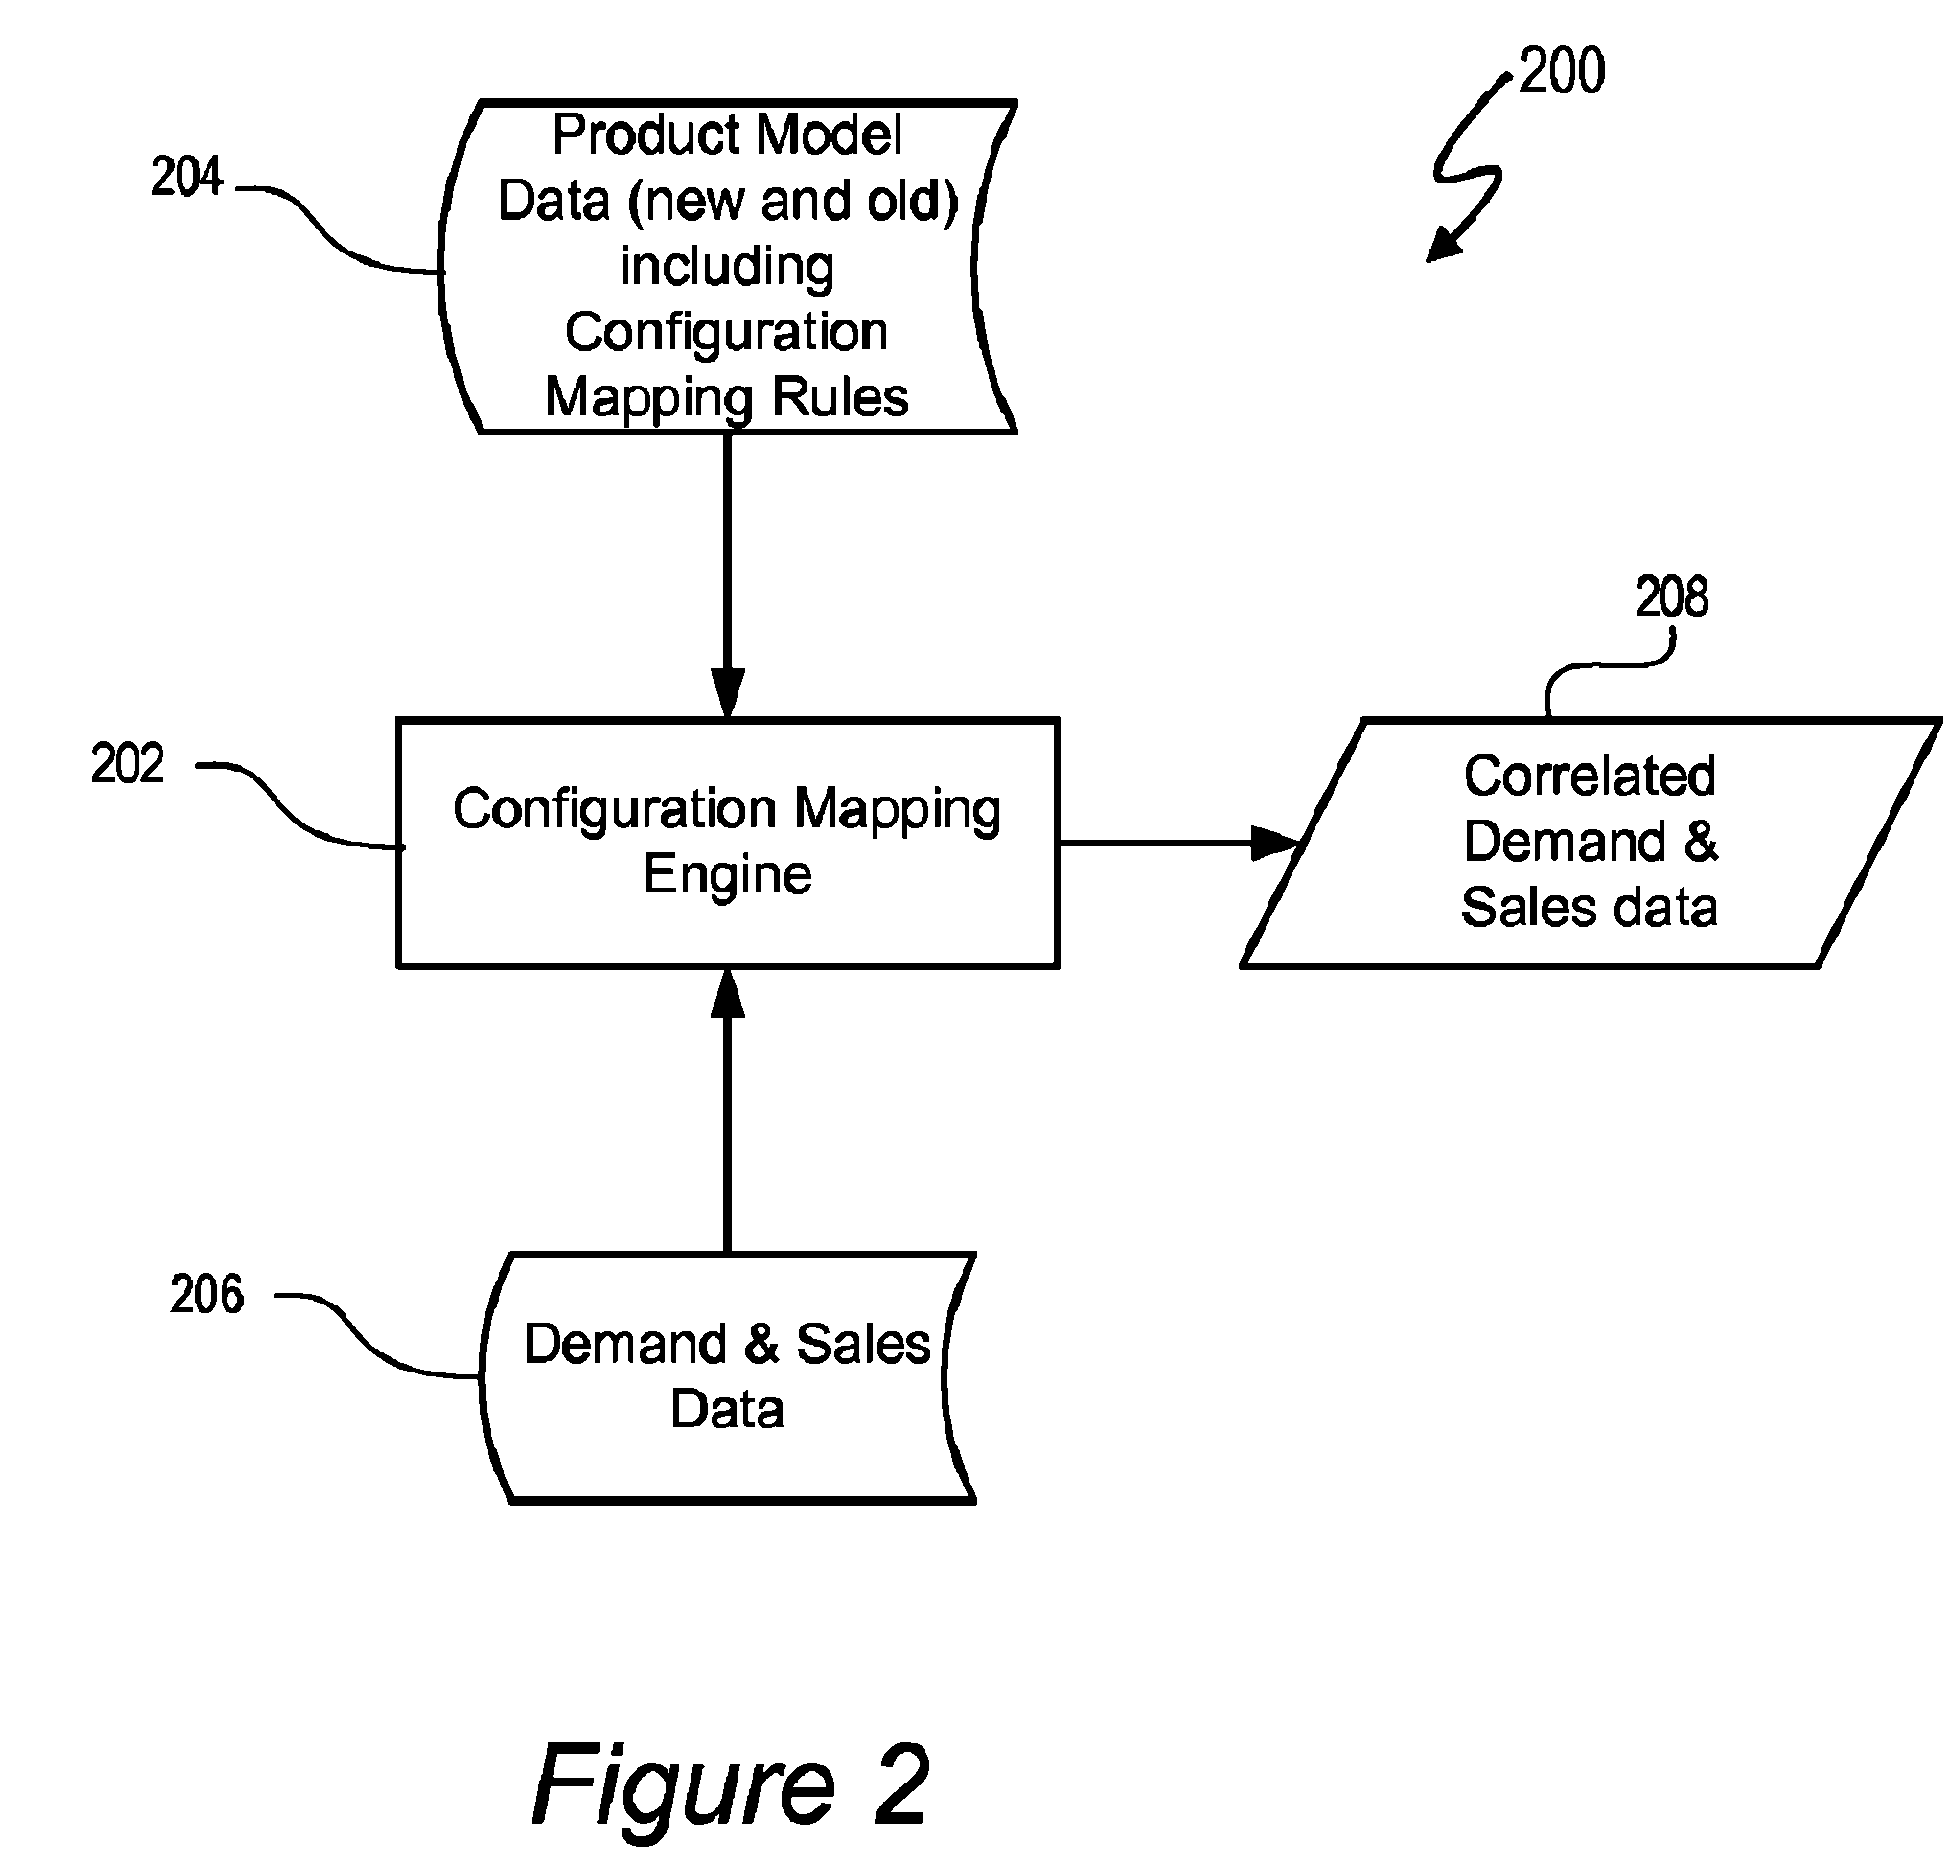 Configuration mapping using a multi-dimensional rule space and rule consolidation